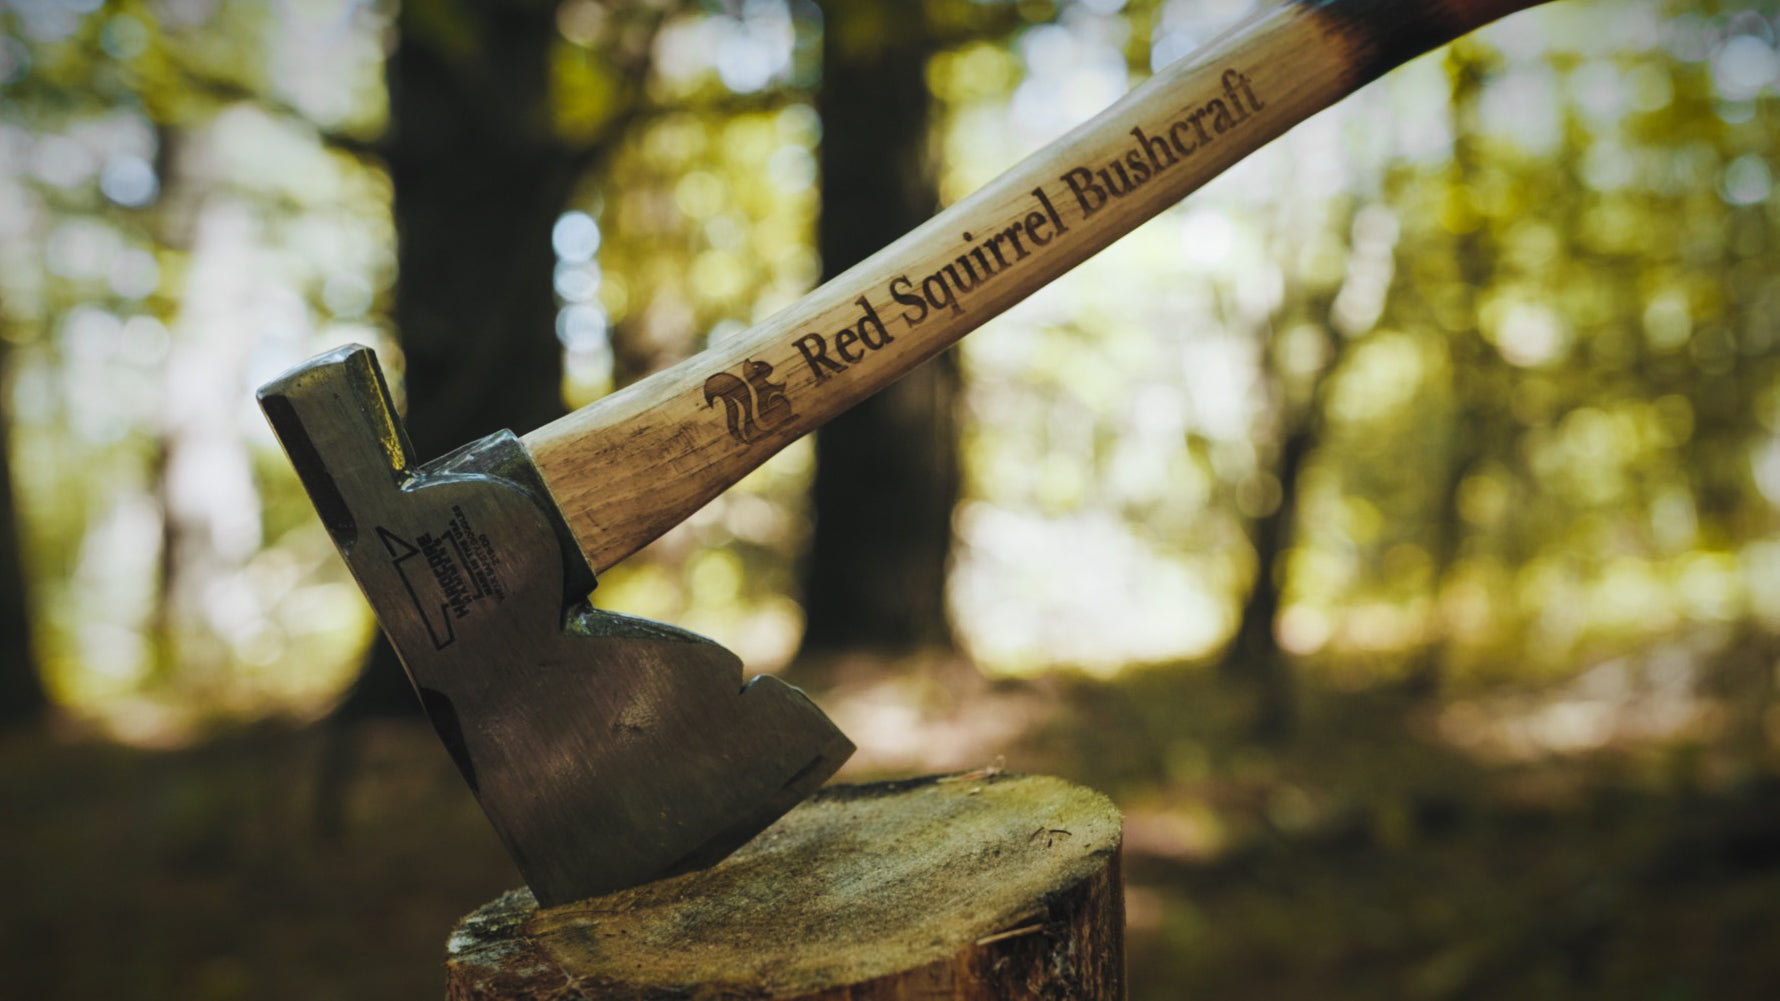 The Artisan - Camping Hatchet - Carving Axe with Sheath -Survival Axe for  Wood Splitting and Chopping - Bushcraft Hatchet - Perfect for Outdoor